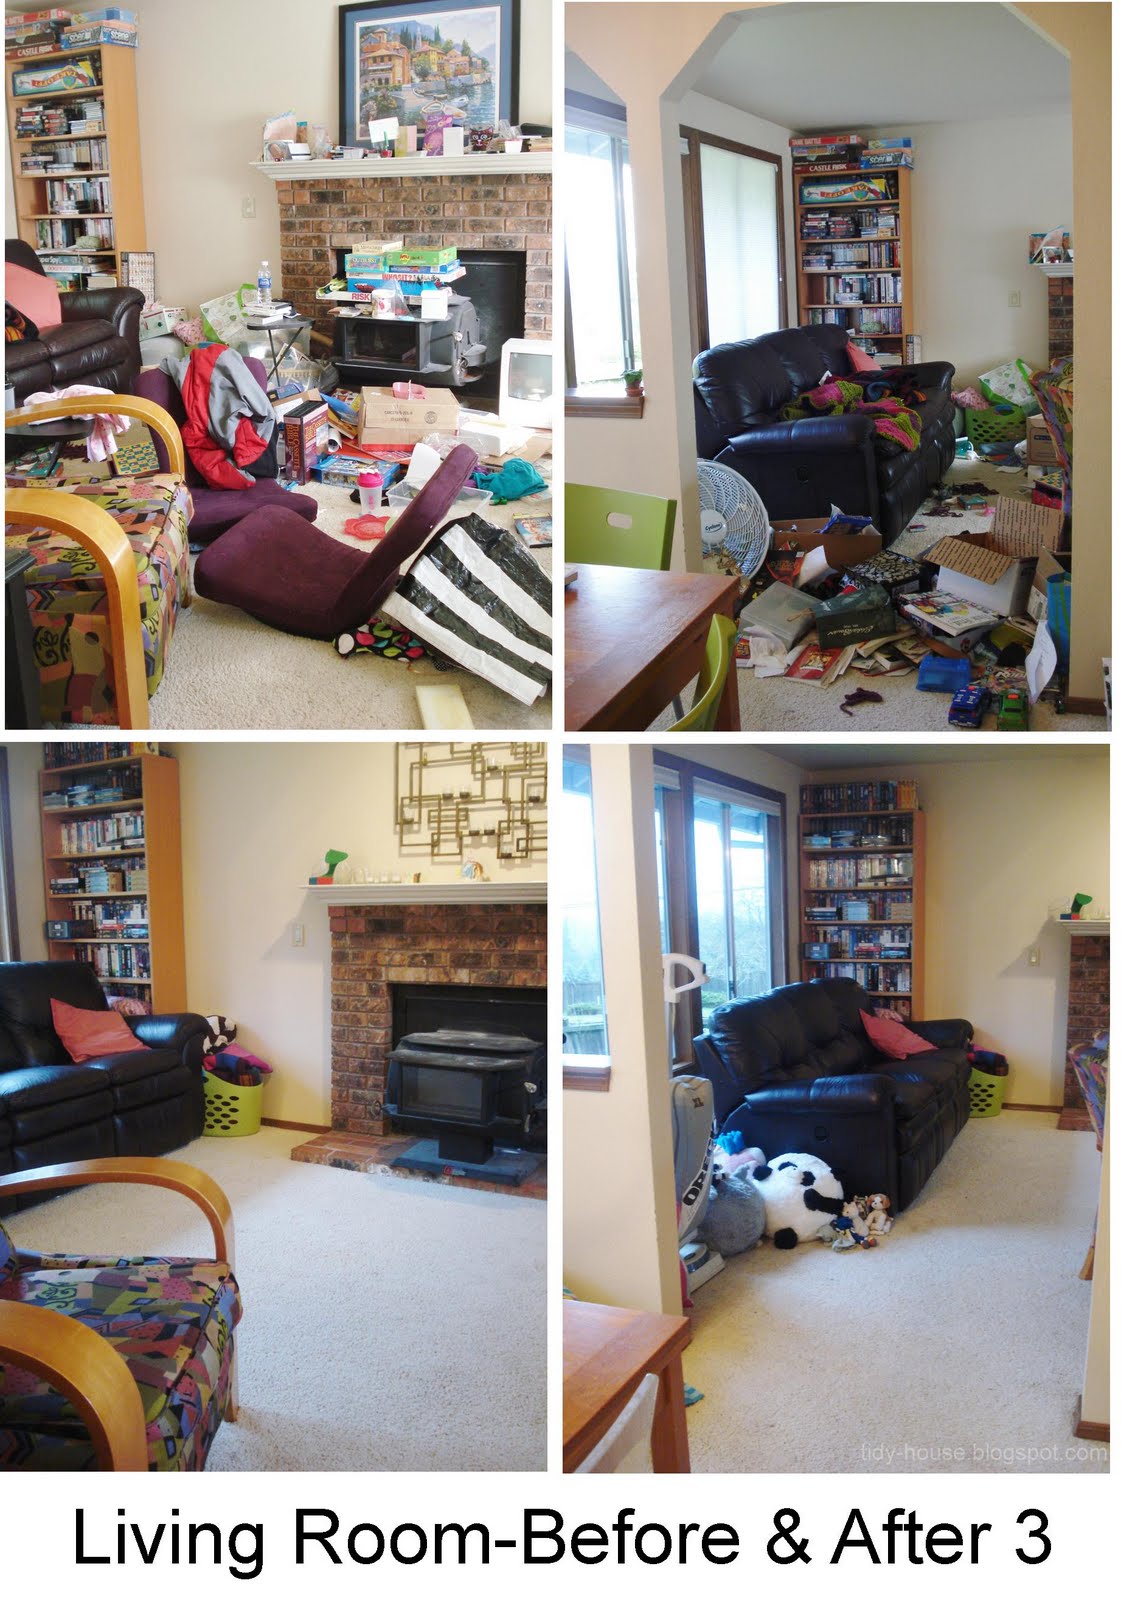 Tidies his room. Before after Room. After в комнату. Living Room before after. Cleaning before after ремонта.